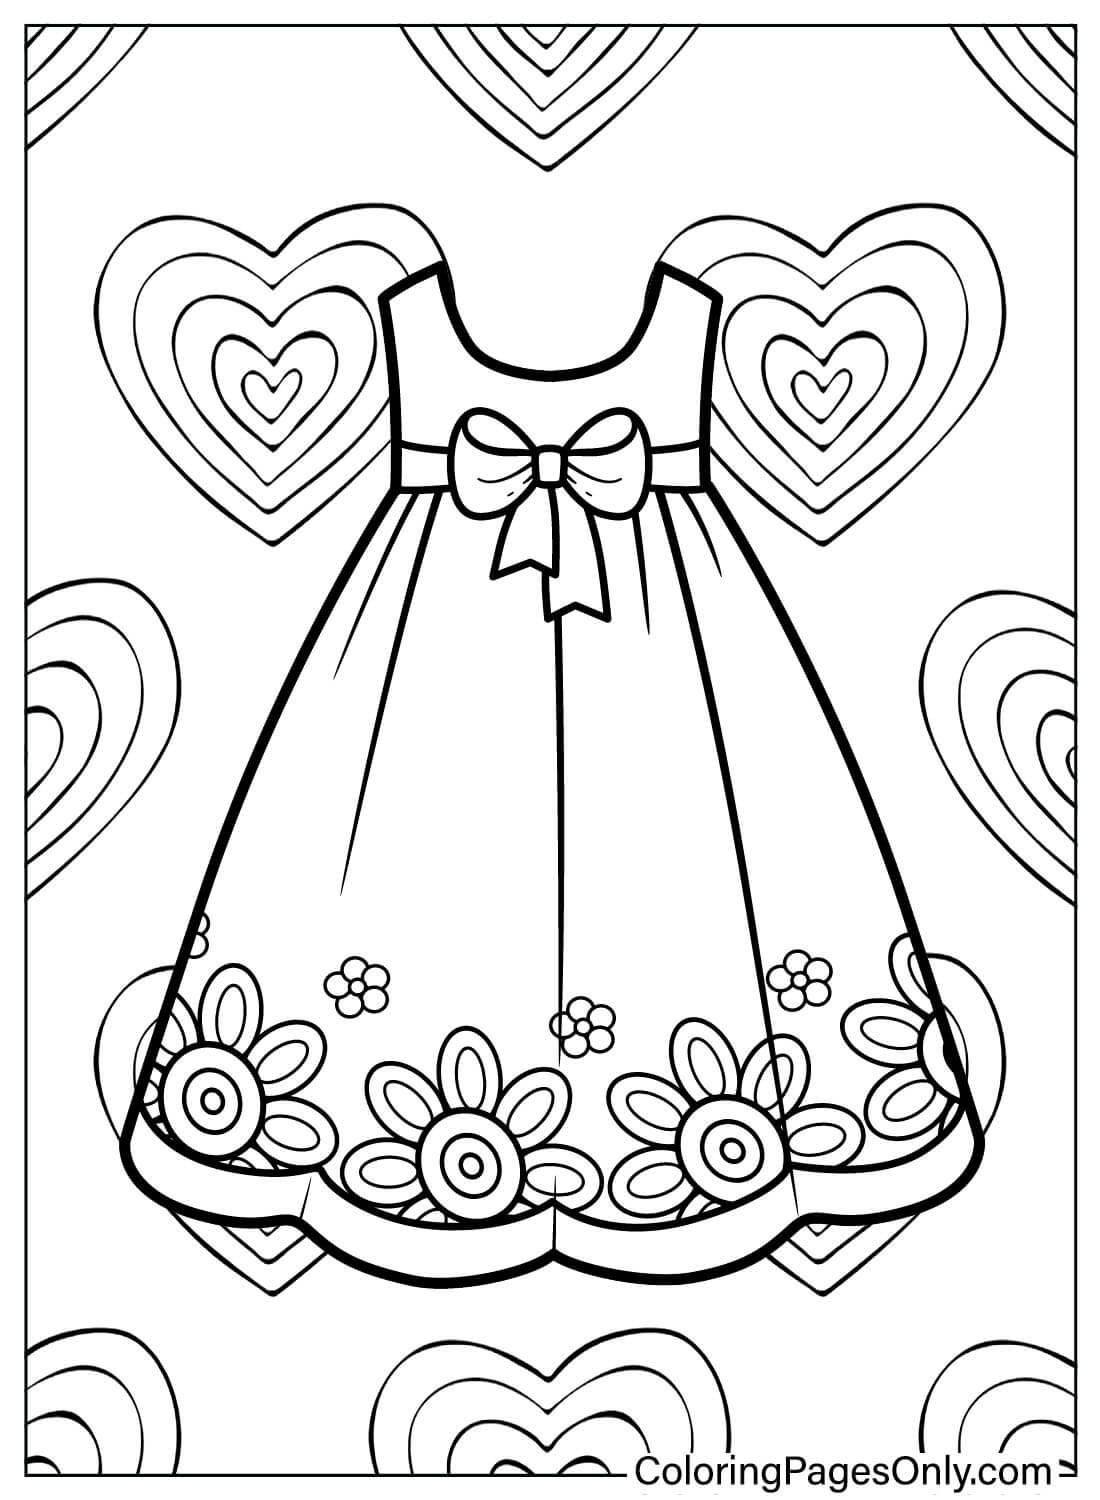 Coloring Book Baby Dress from Baby Dress